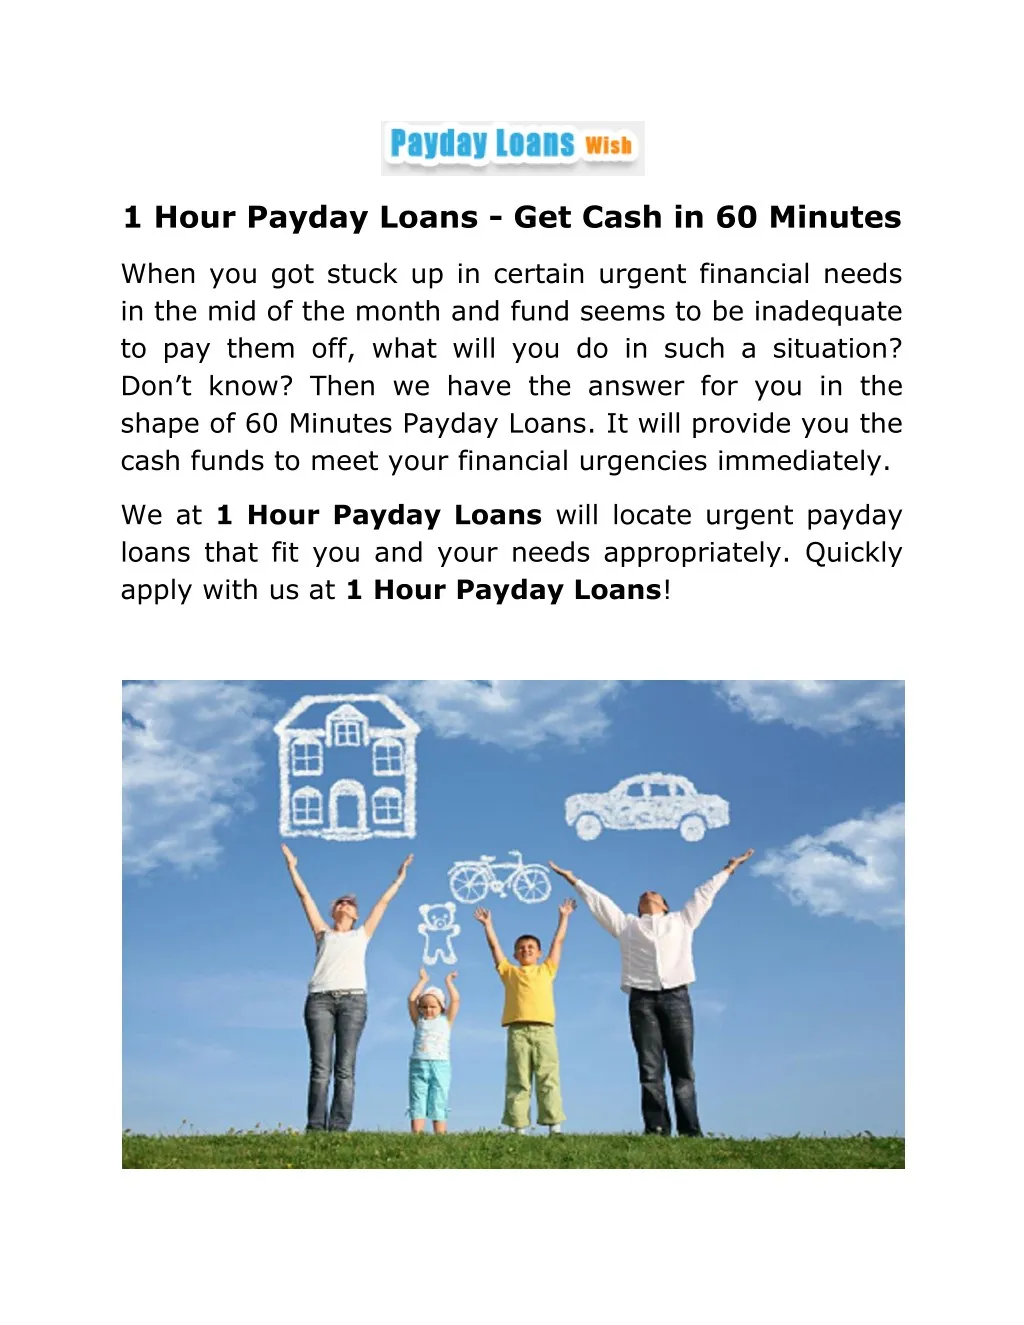 1 hour payday loans get cash in 60 minutes